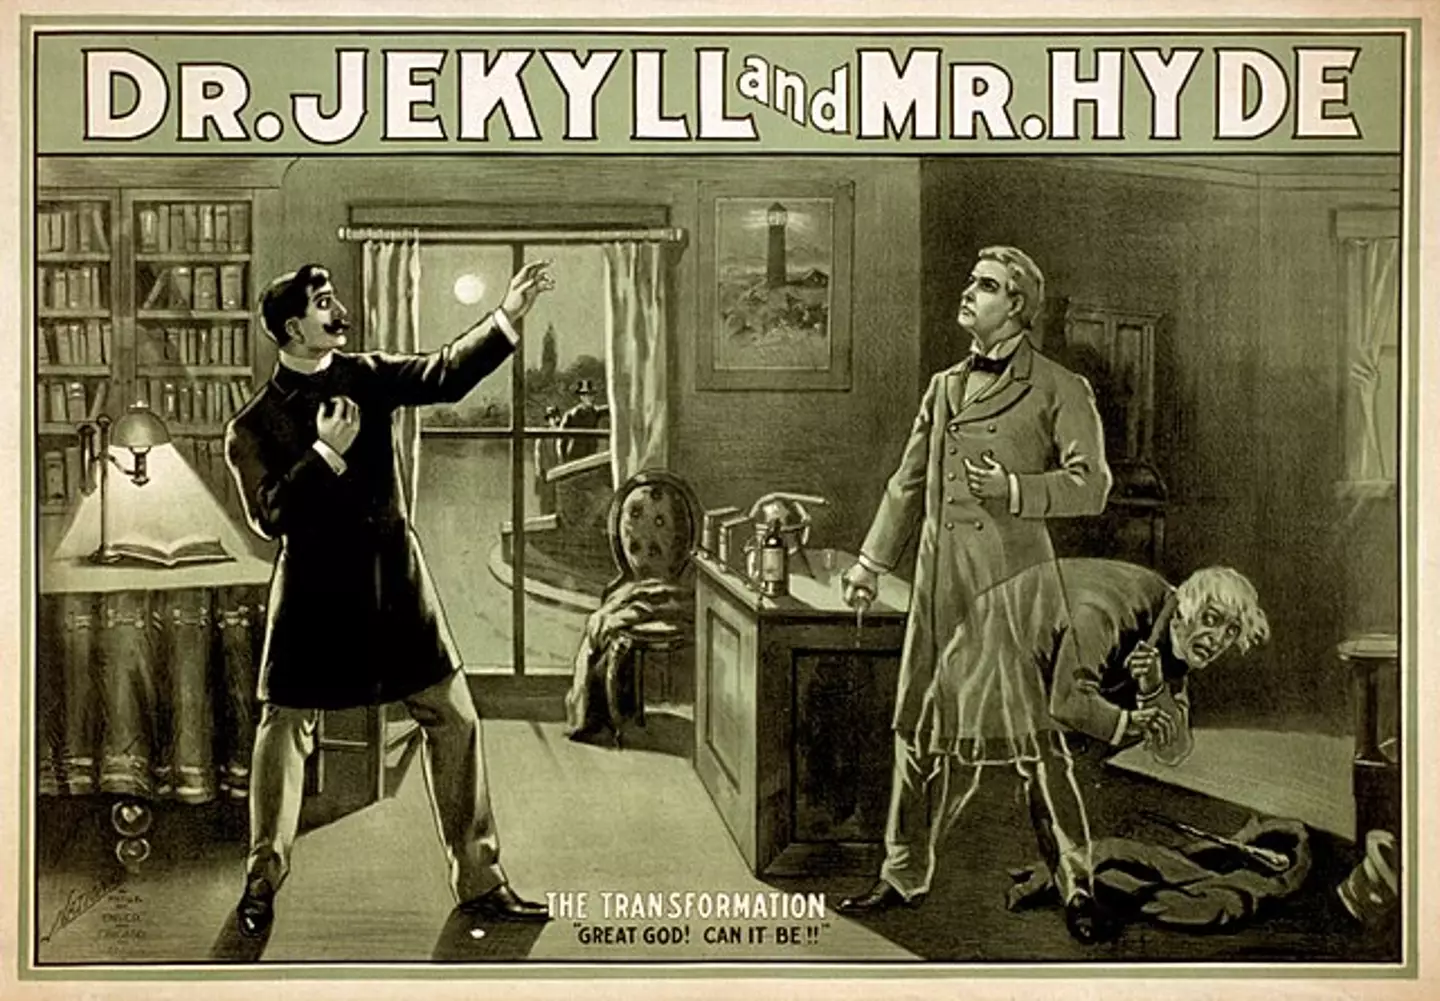 The Strange Case of Dr Jekyll and Mr Hyde was written by Robert Louis Stevenson.